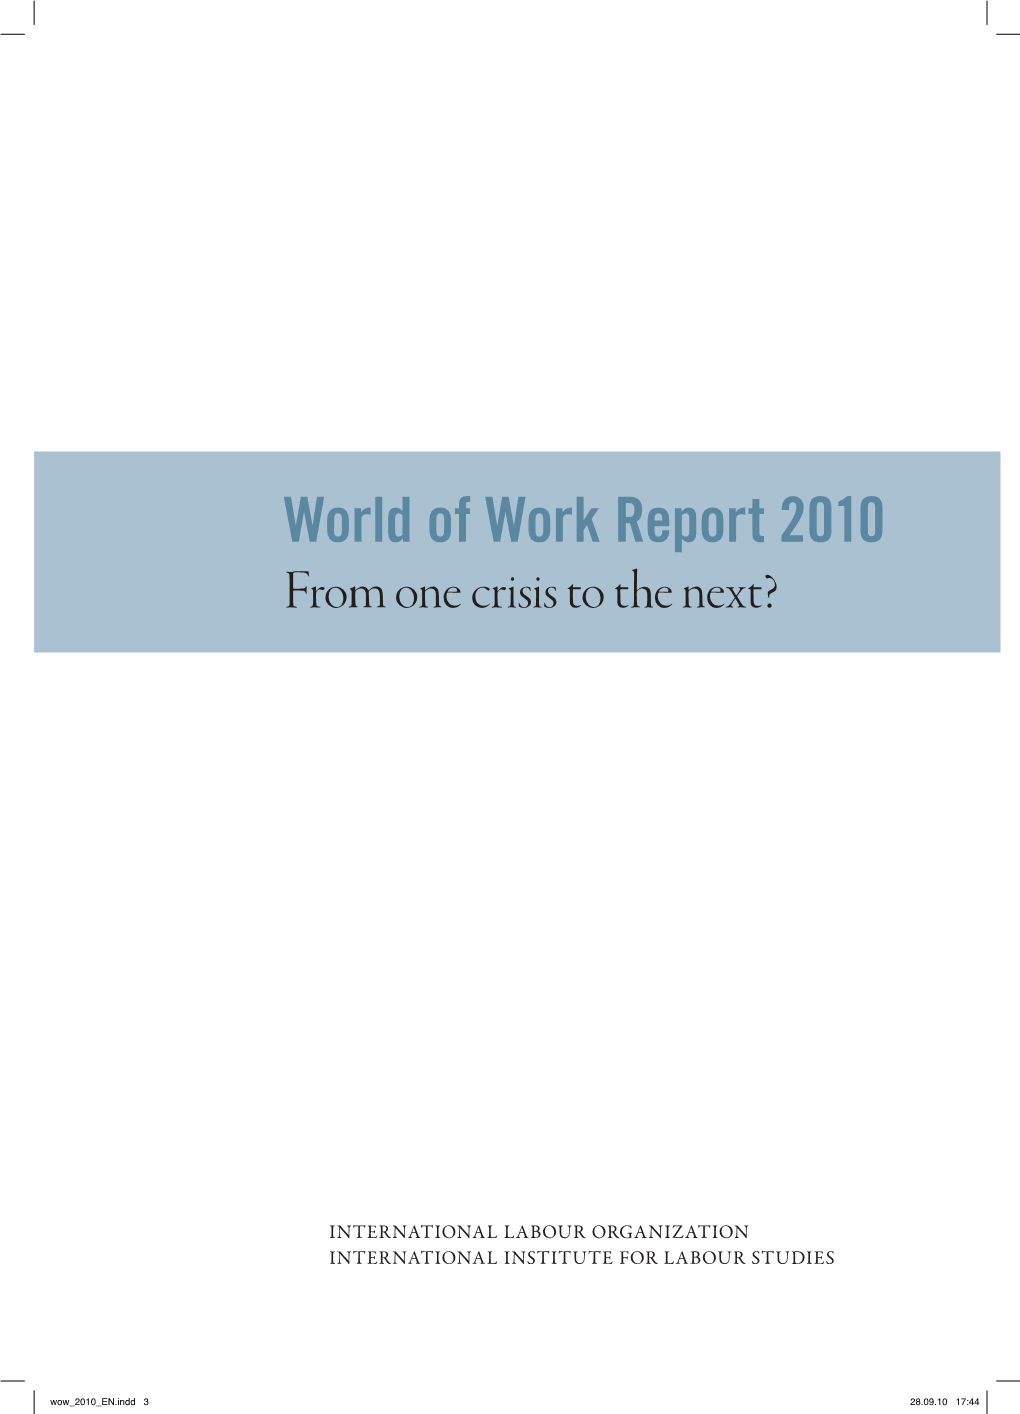 World of Work Report 2010. from One Crisis to the Next?